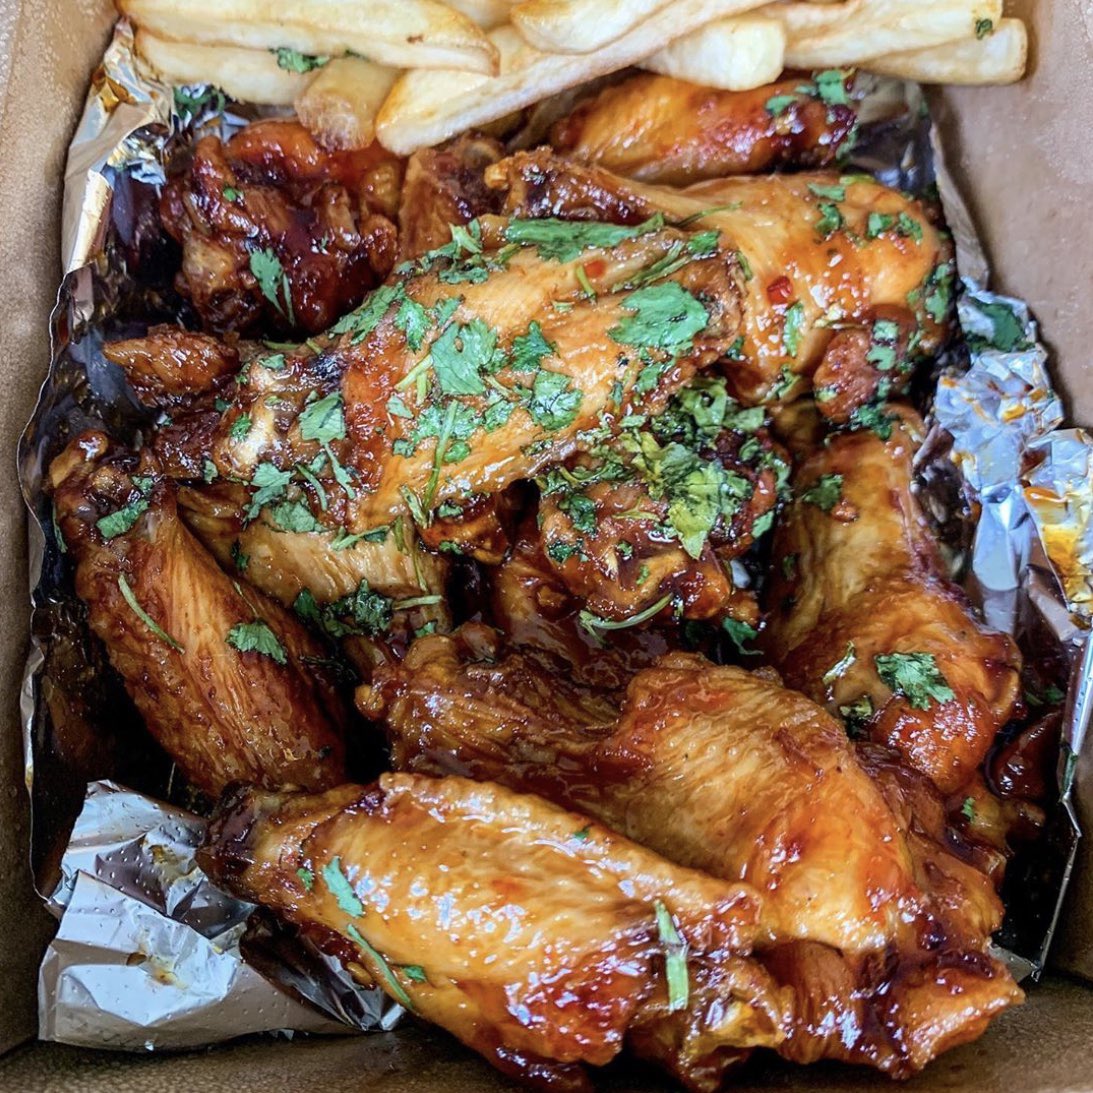 I want to know where everybody gets their wings from! City or county. The best wings you’ve had in the Baltimore area.